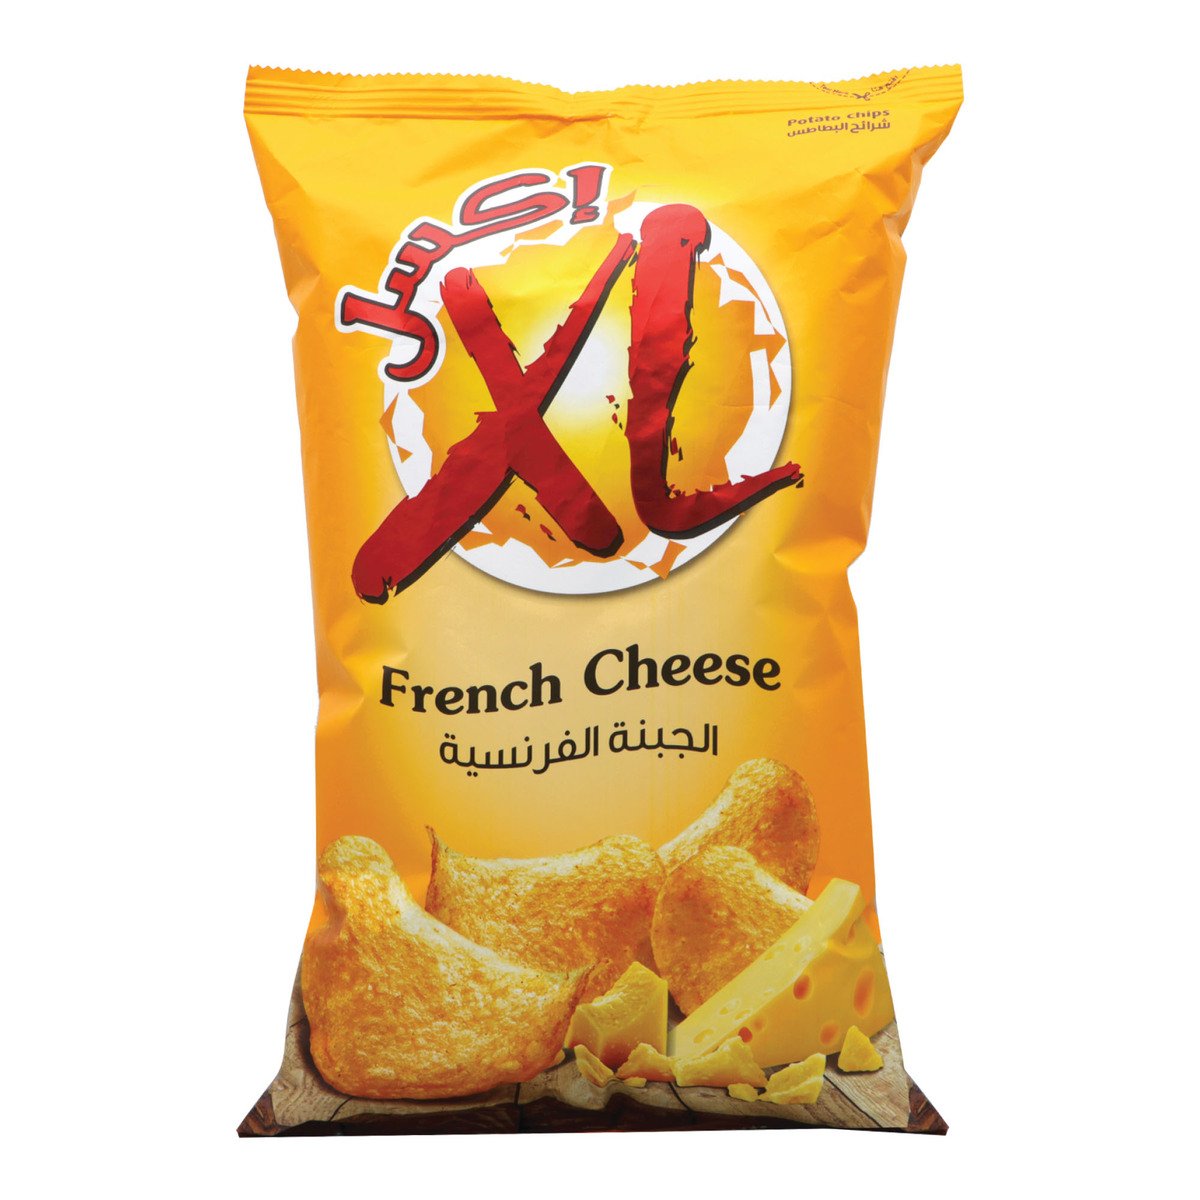 XL Potato Chips French Cheese 165g